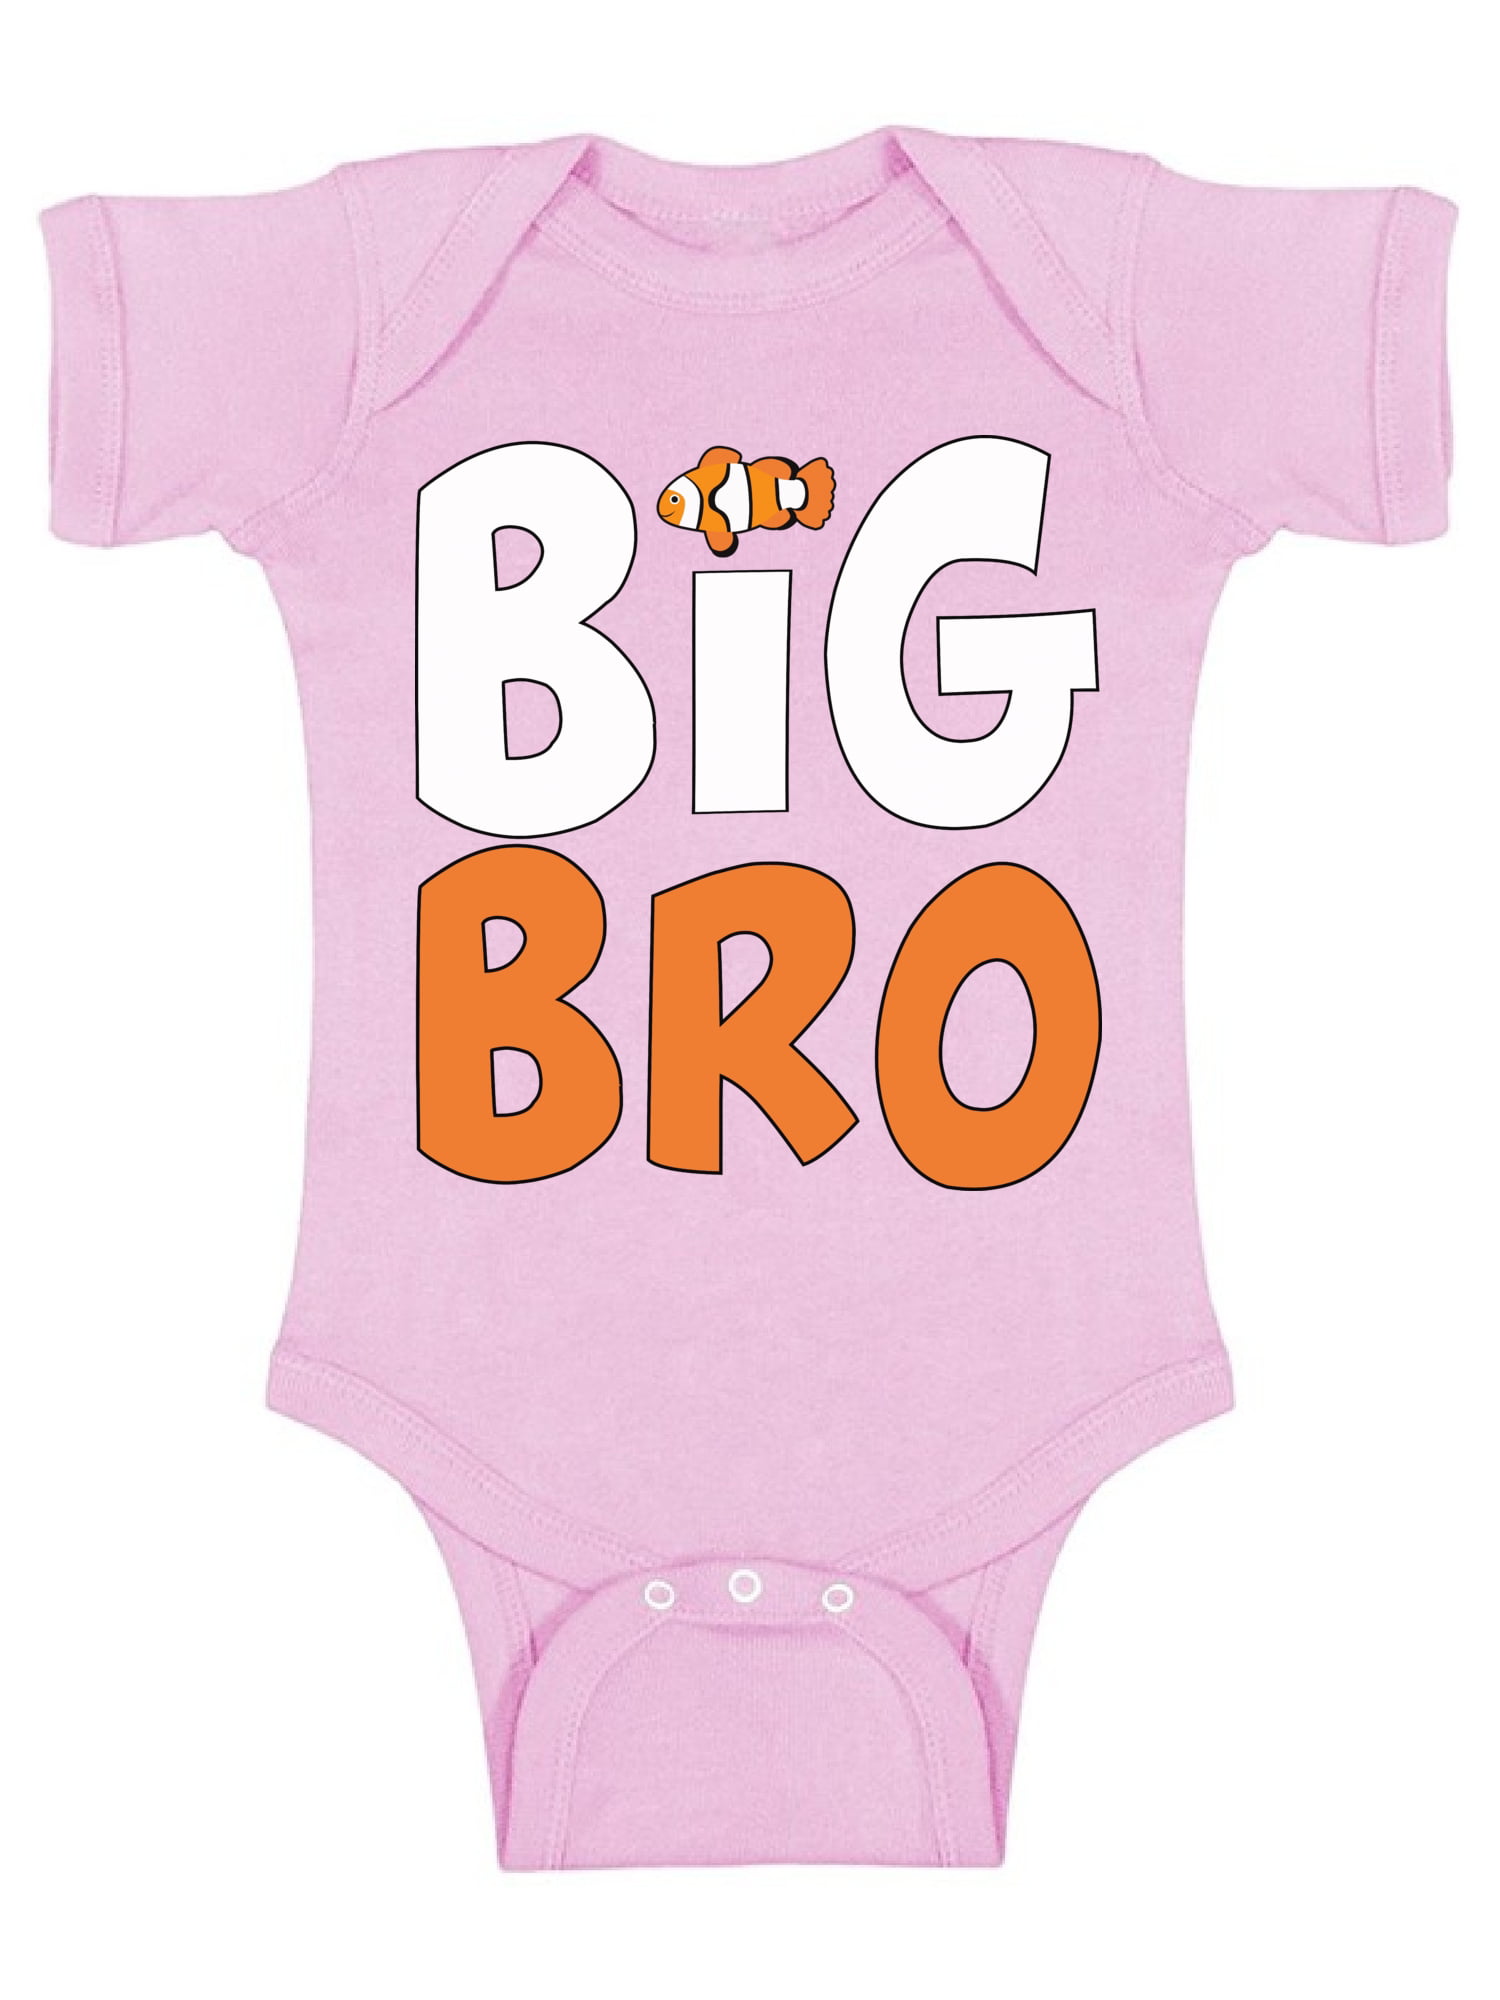 Awkward Styles Cute Romper for Little One Ladybug Baby Items for Boys Lil Brother Outfit